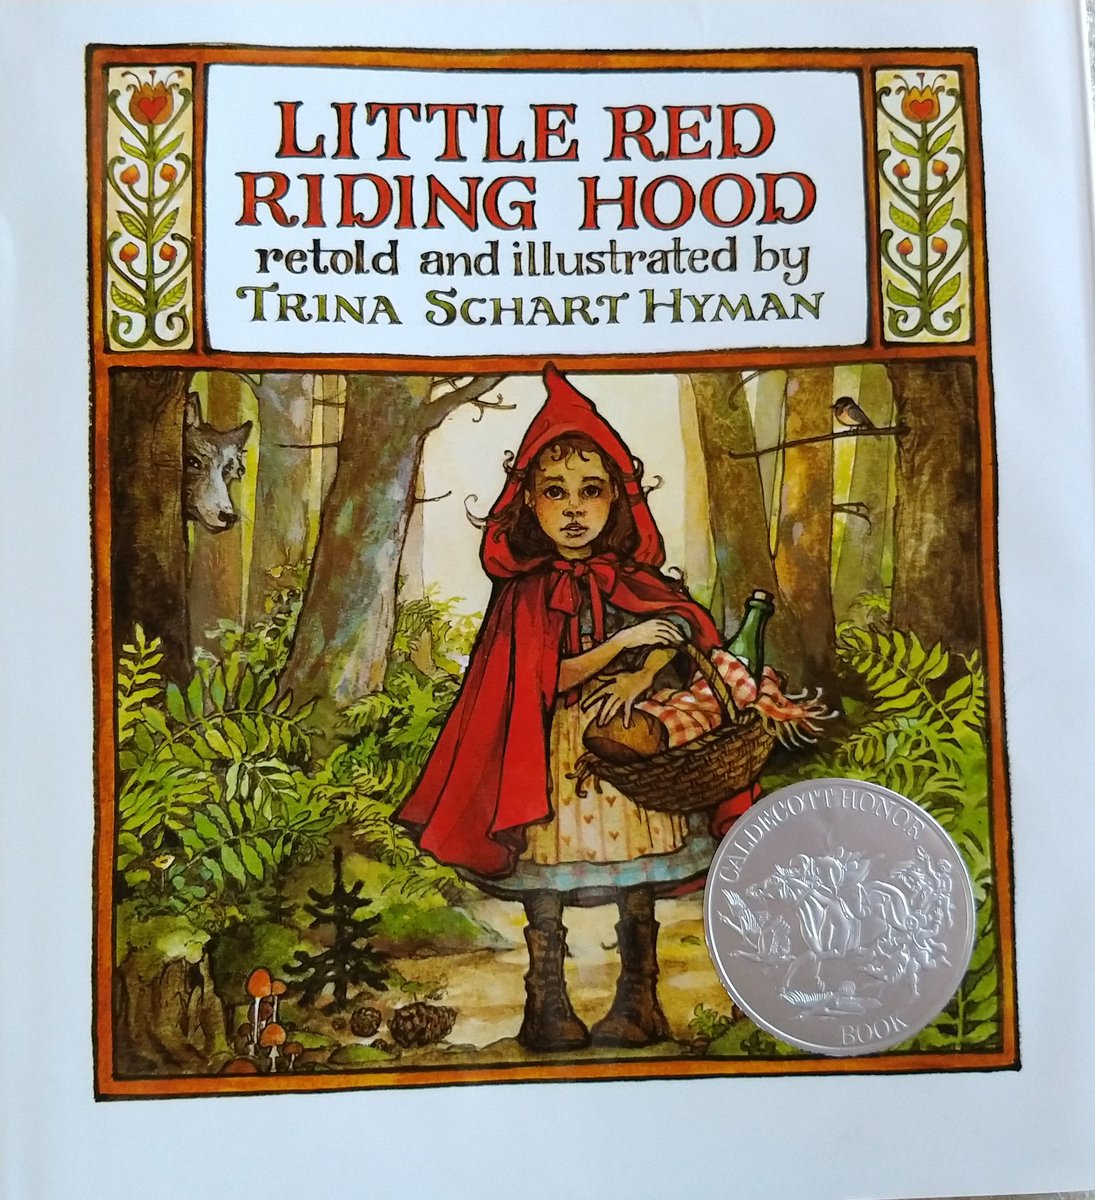 32. Little Red Riding HoodOf course everyone knows this story, but everyone must also hear it for the first time.A problem with many stories is that they are written for the entertainment of a jaded reader, rather than for a naive child. Modern Disney movies exemplify this.